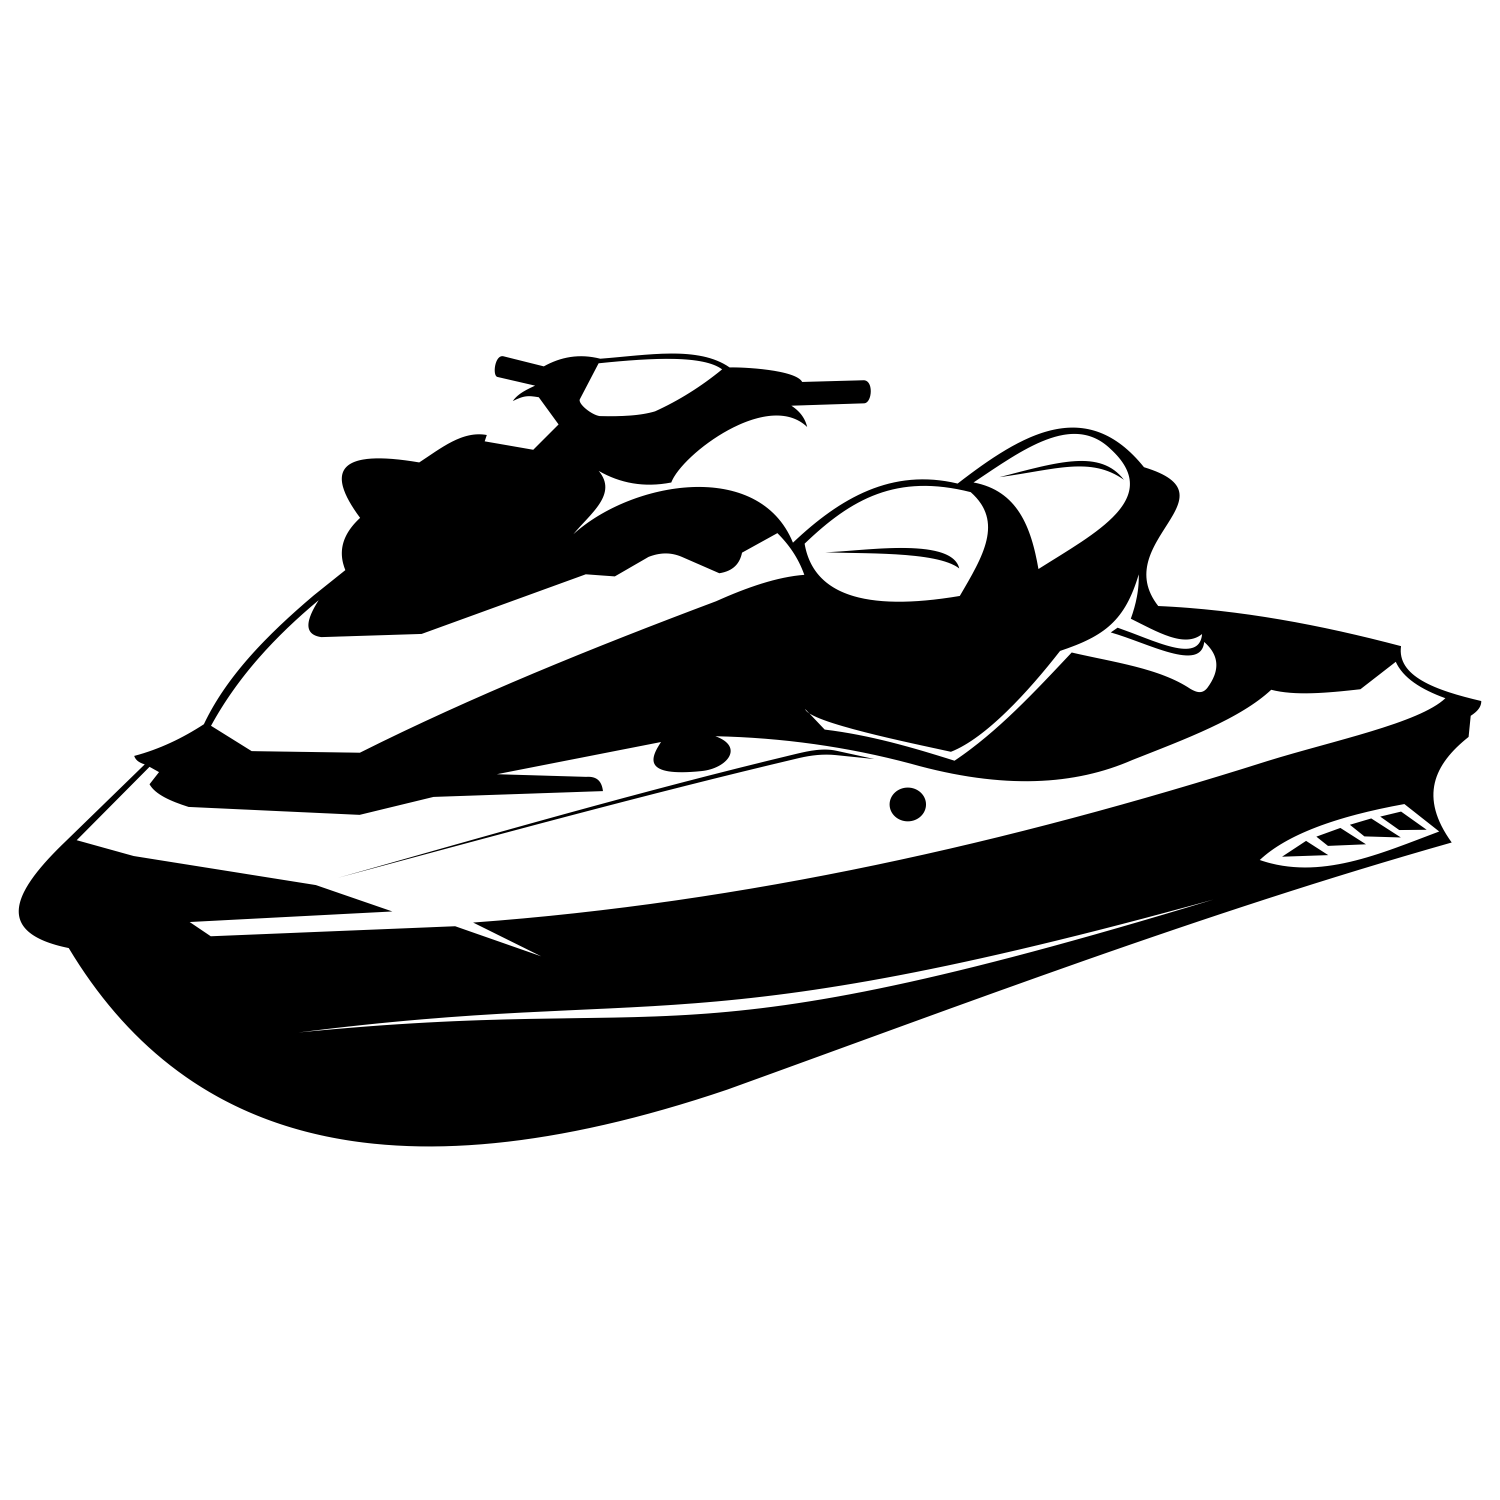 Boating clipart water scooter. Jet ski personal craft